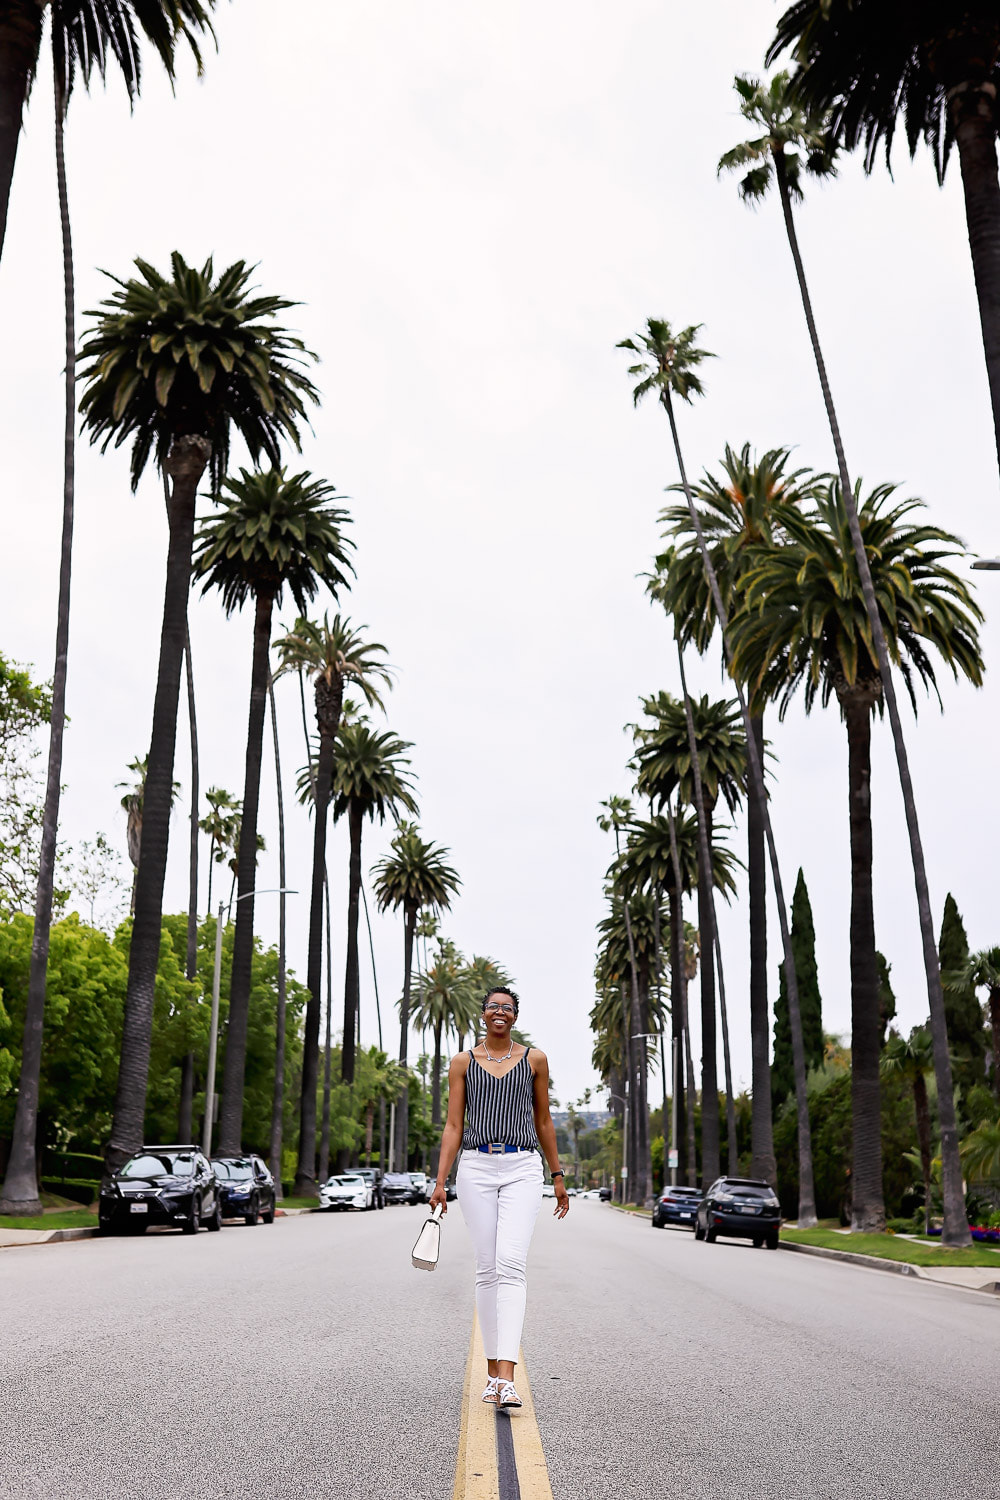 Tamieka Smith surrounded by the palm trees in Beverly Hills, a family photographer in Beverly Hills